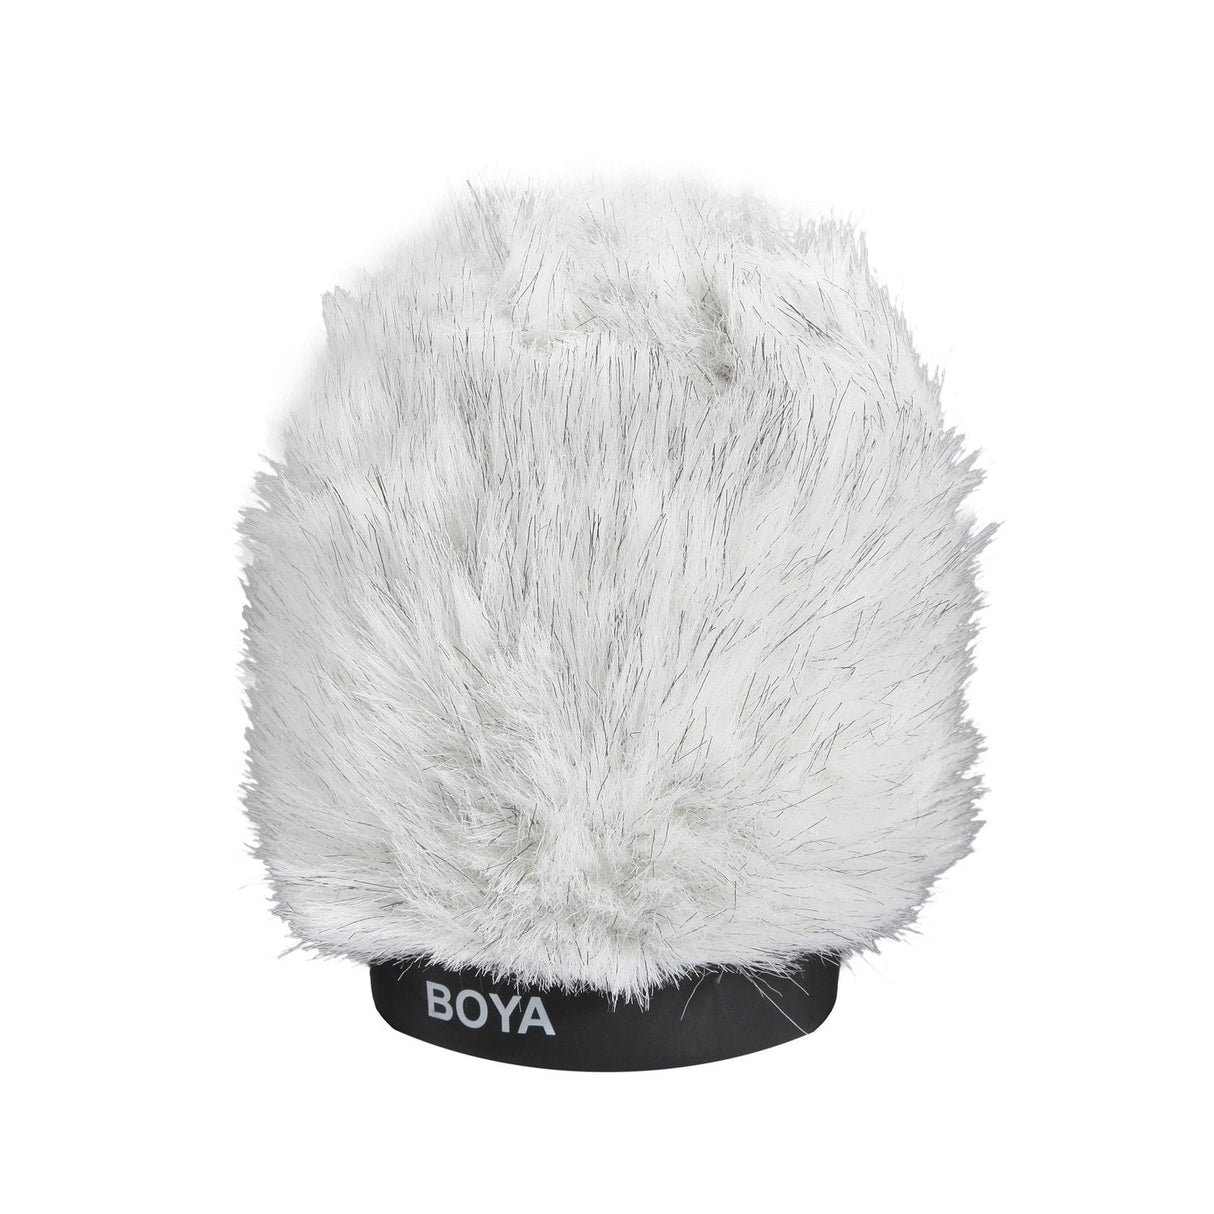 BOYA BY-P100 Furry Outdoor Interview Microphone Windshield Muff for Shotgun Capacitor Microphones